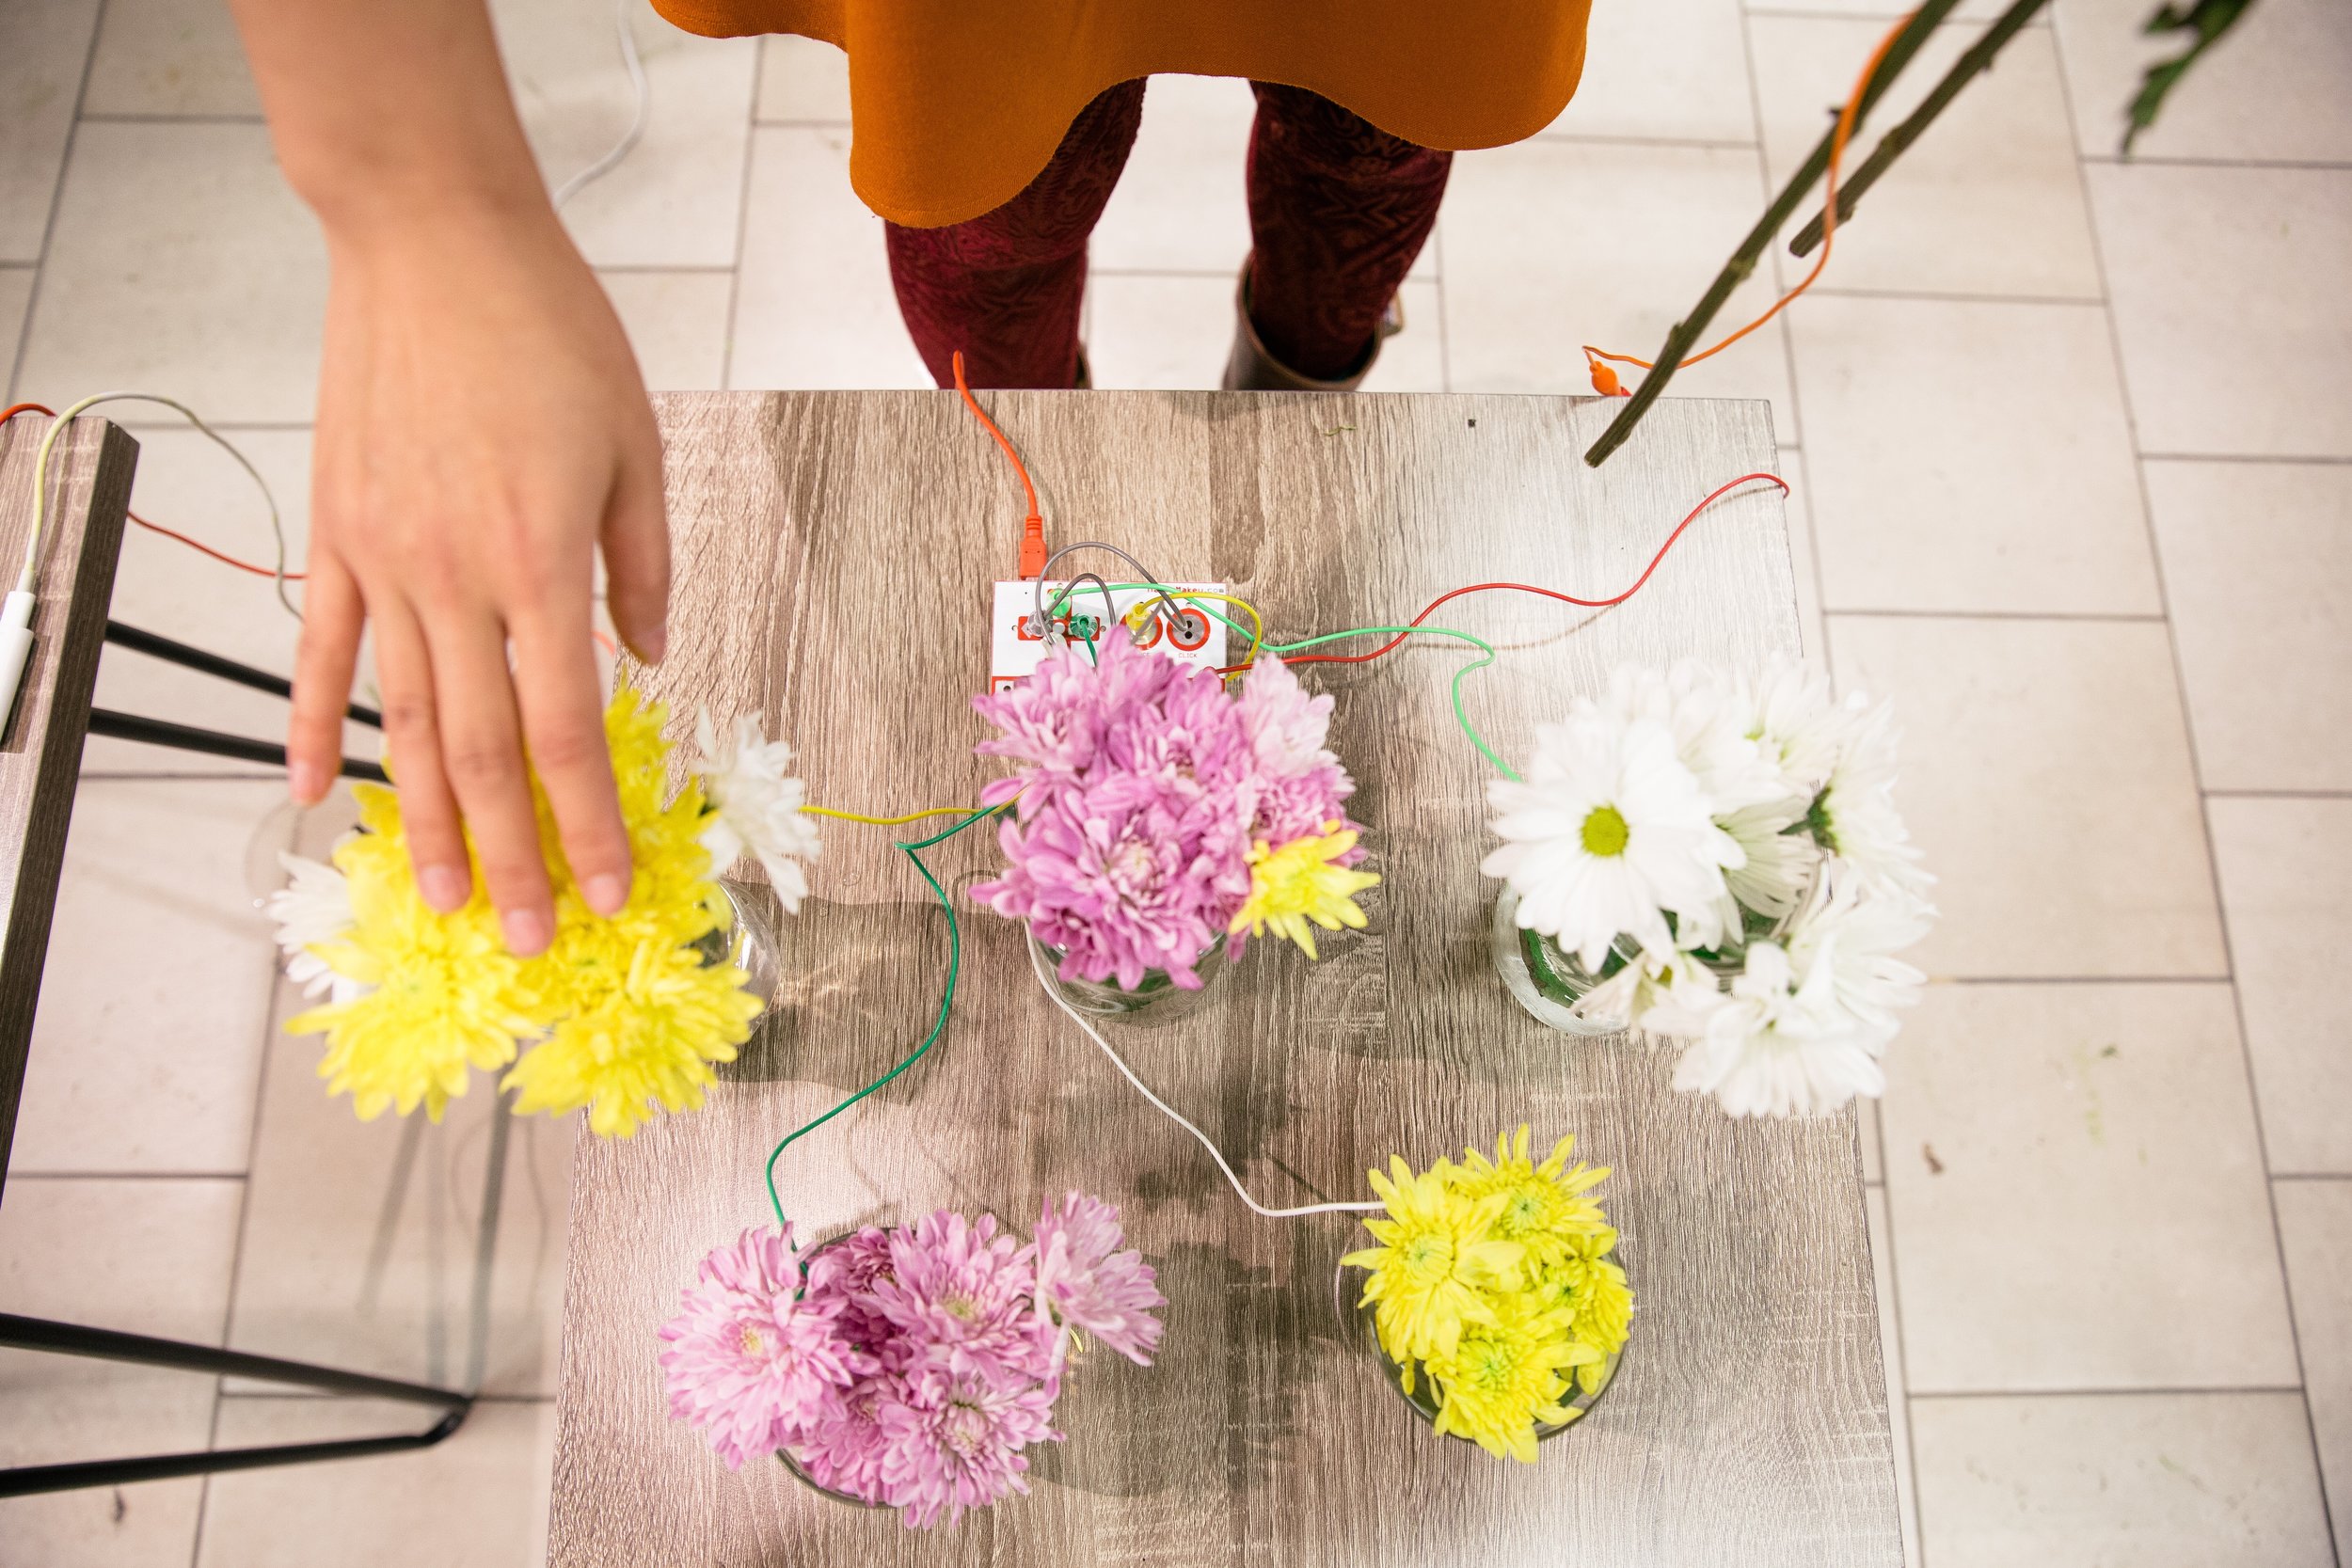 Magical Flower DJ - An Interactive Art and Education Experience 